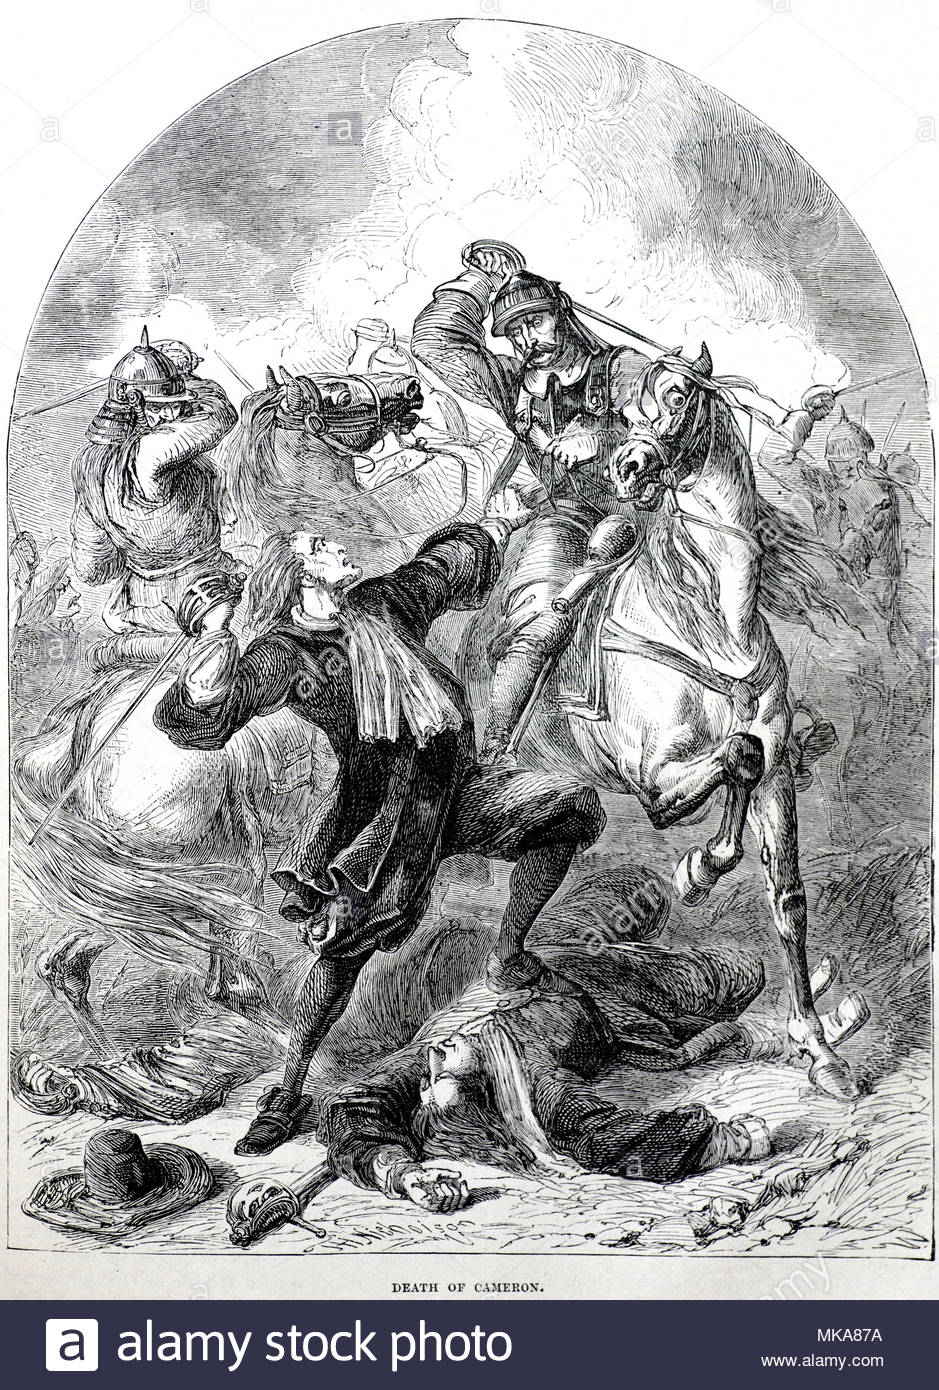 Death of Richard Cameron of Huddersfield,1648 – 1680, who was a leader of the Covenanters who resisted attempts by the Stuart monarchs to control the affairs of the Church of Scotland, a battle on 22nd July 1680 at Airds Moss Ayrshire between Cameron and his Hill Men, with government dragoons commanded by Andrew Bruce of Earlshall, also known as Bluidy Bruce, vintage illustration from circa 1880 Stock Photo